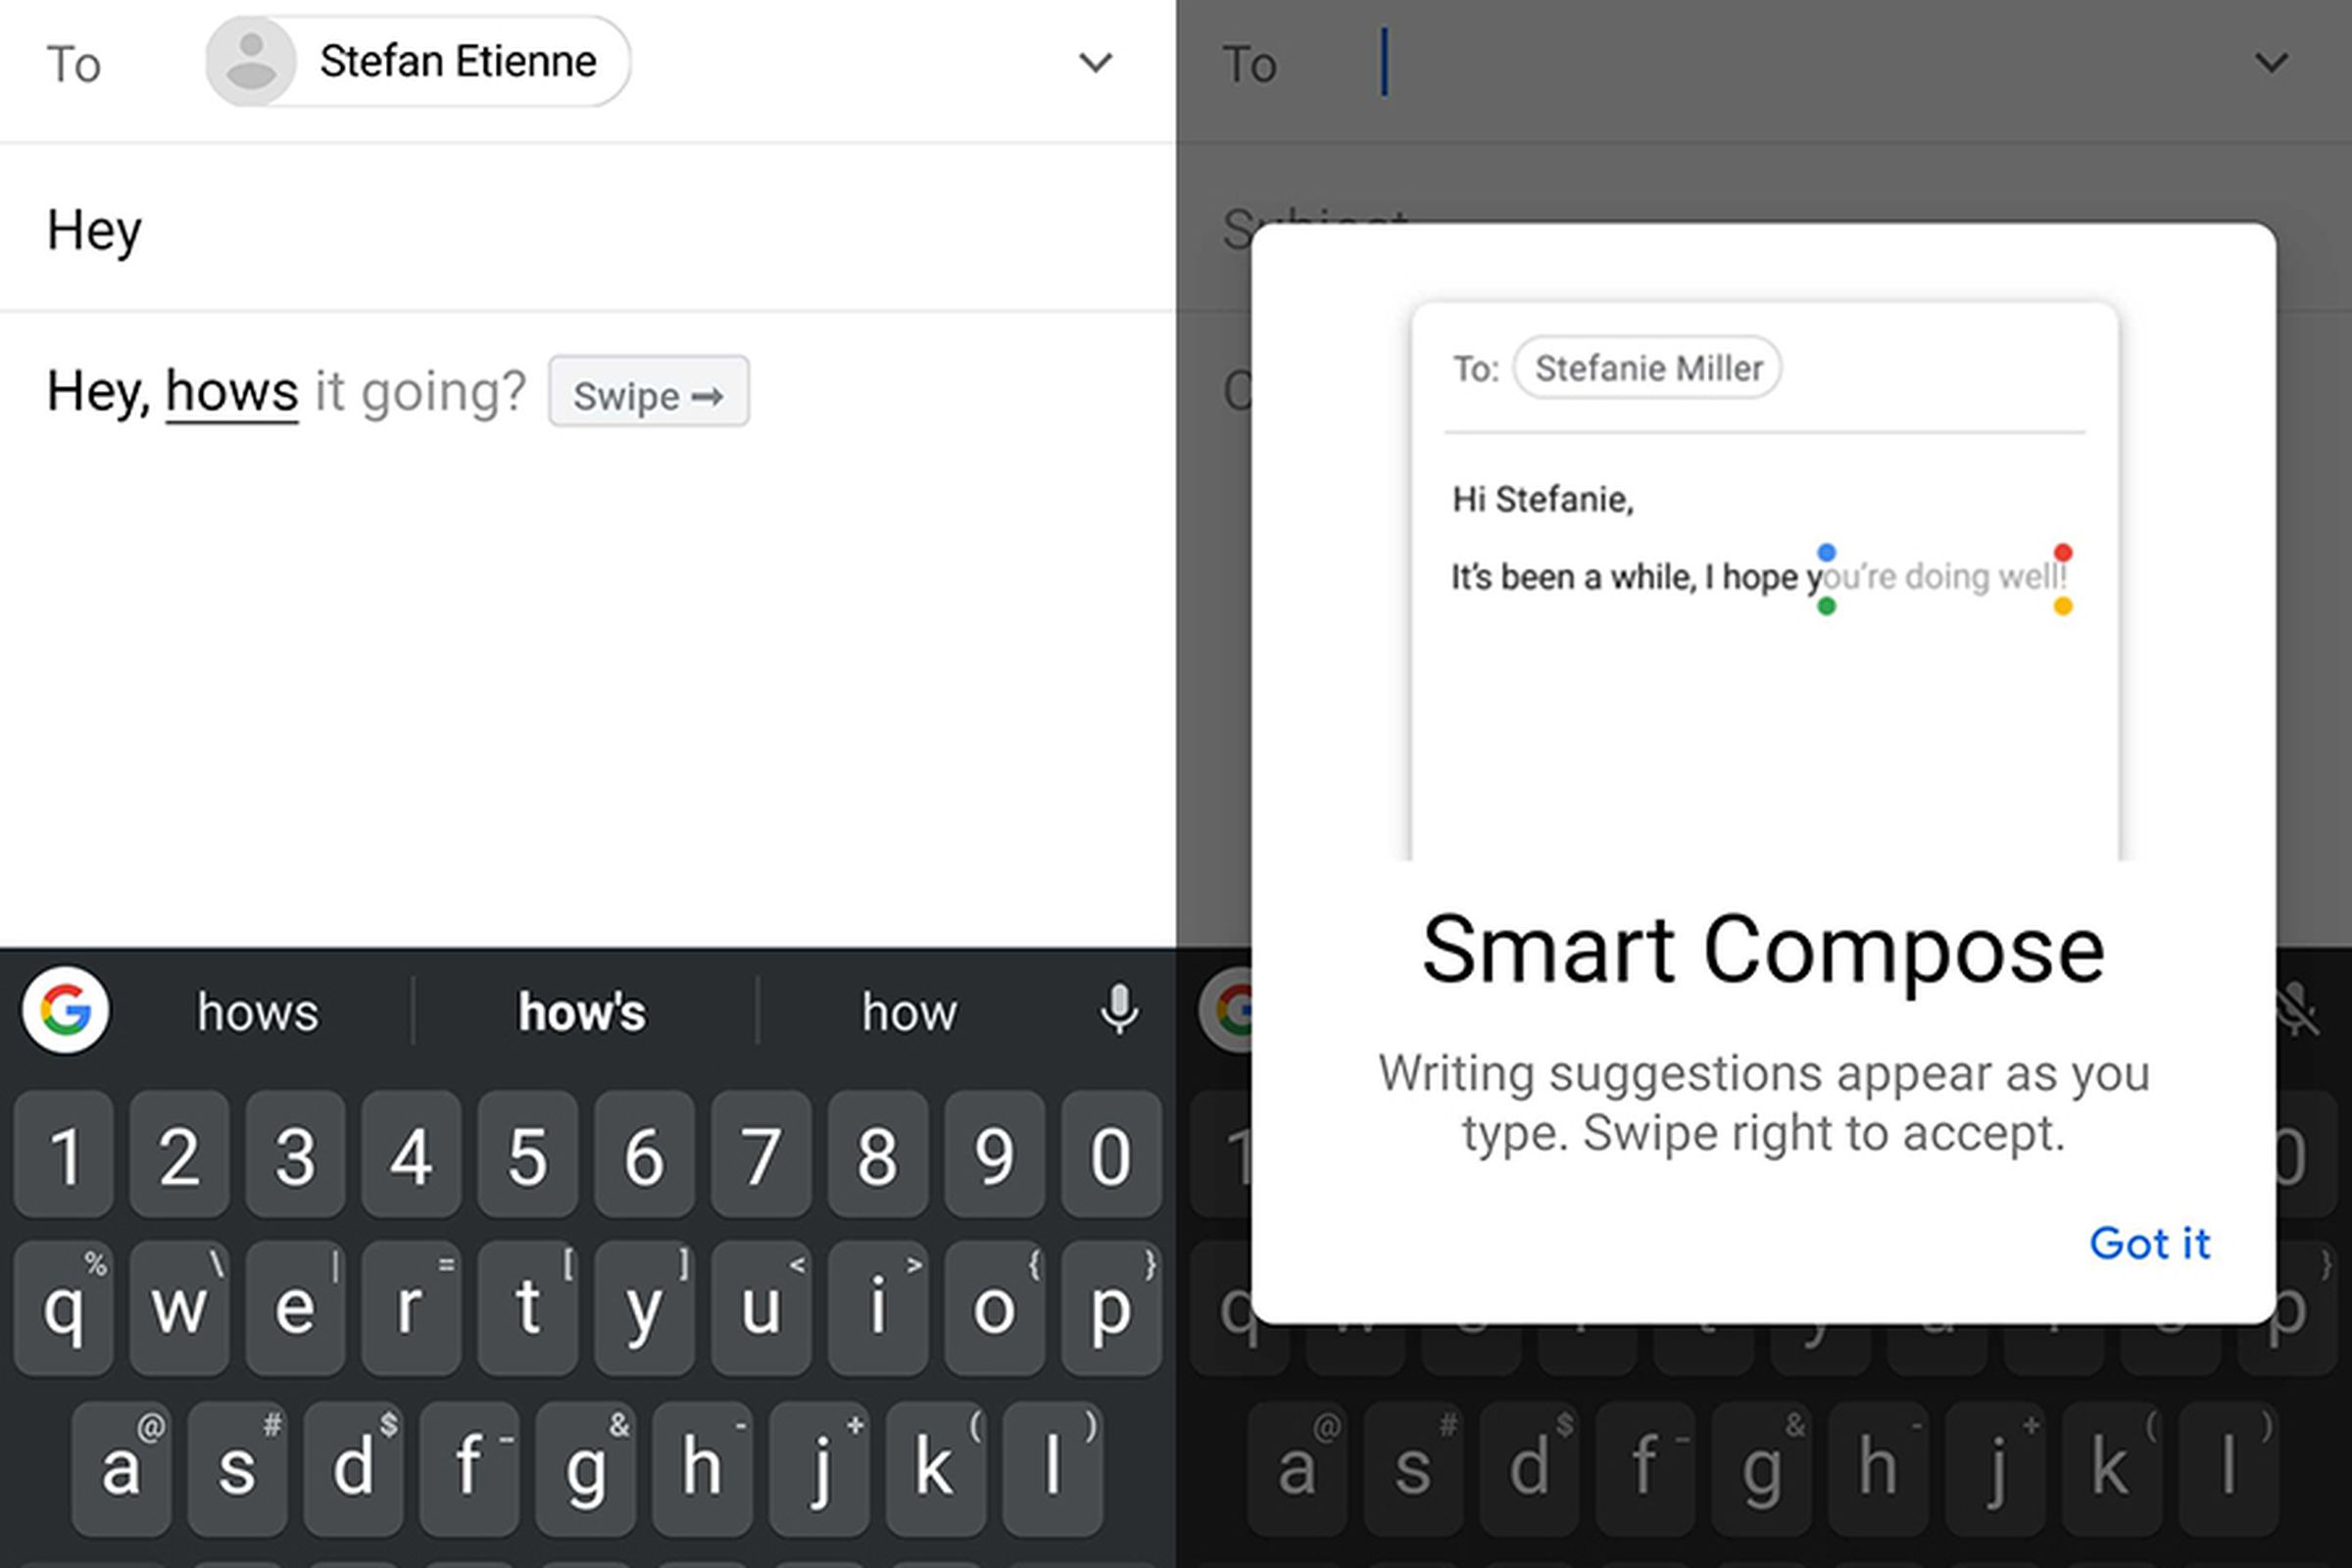 Smart Compose running on the Galaxy S10+